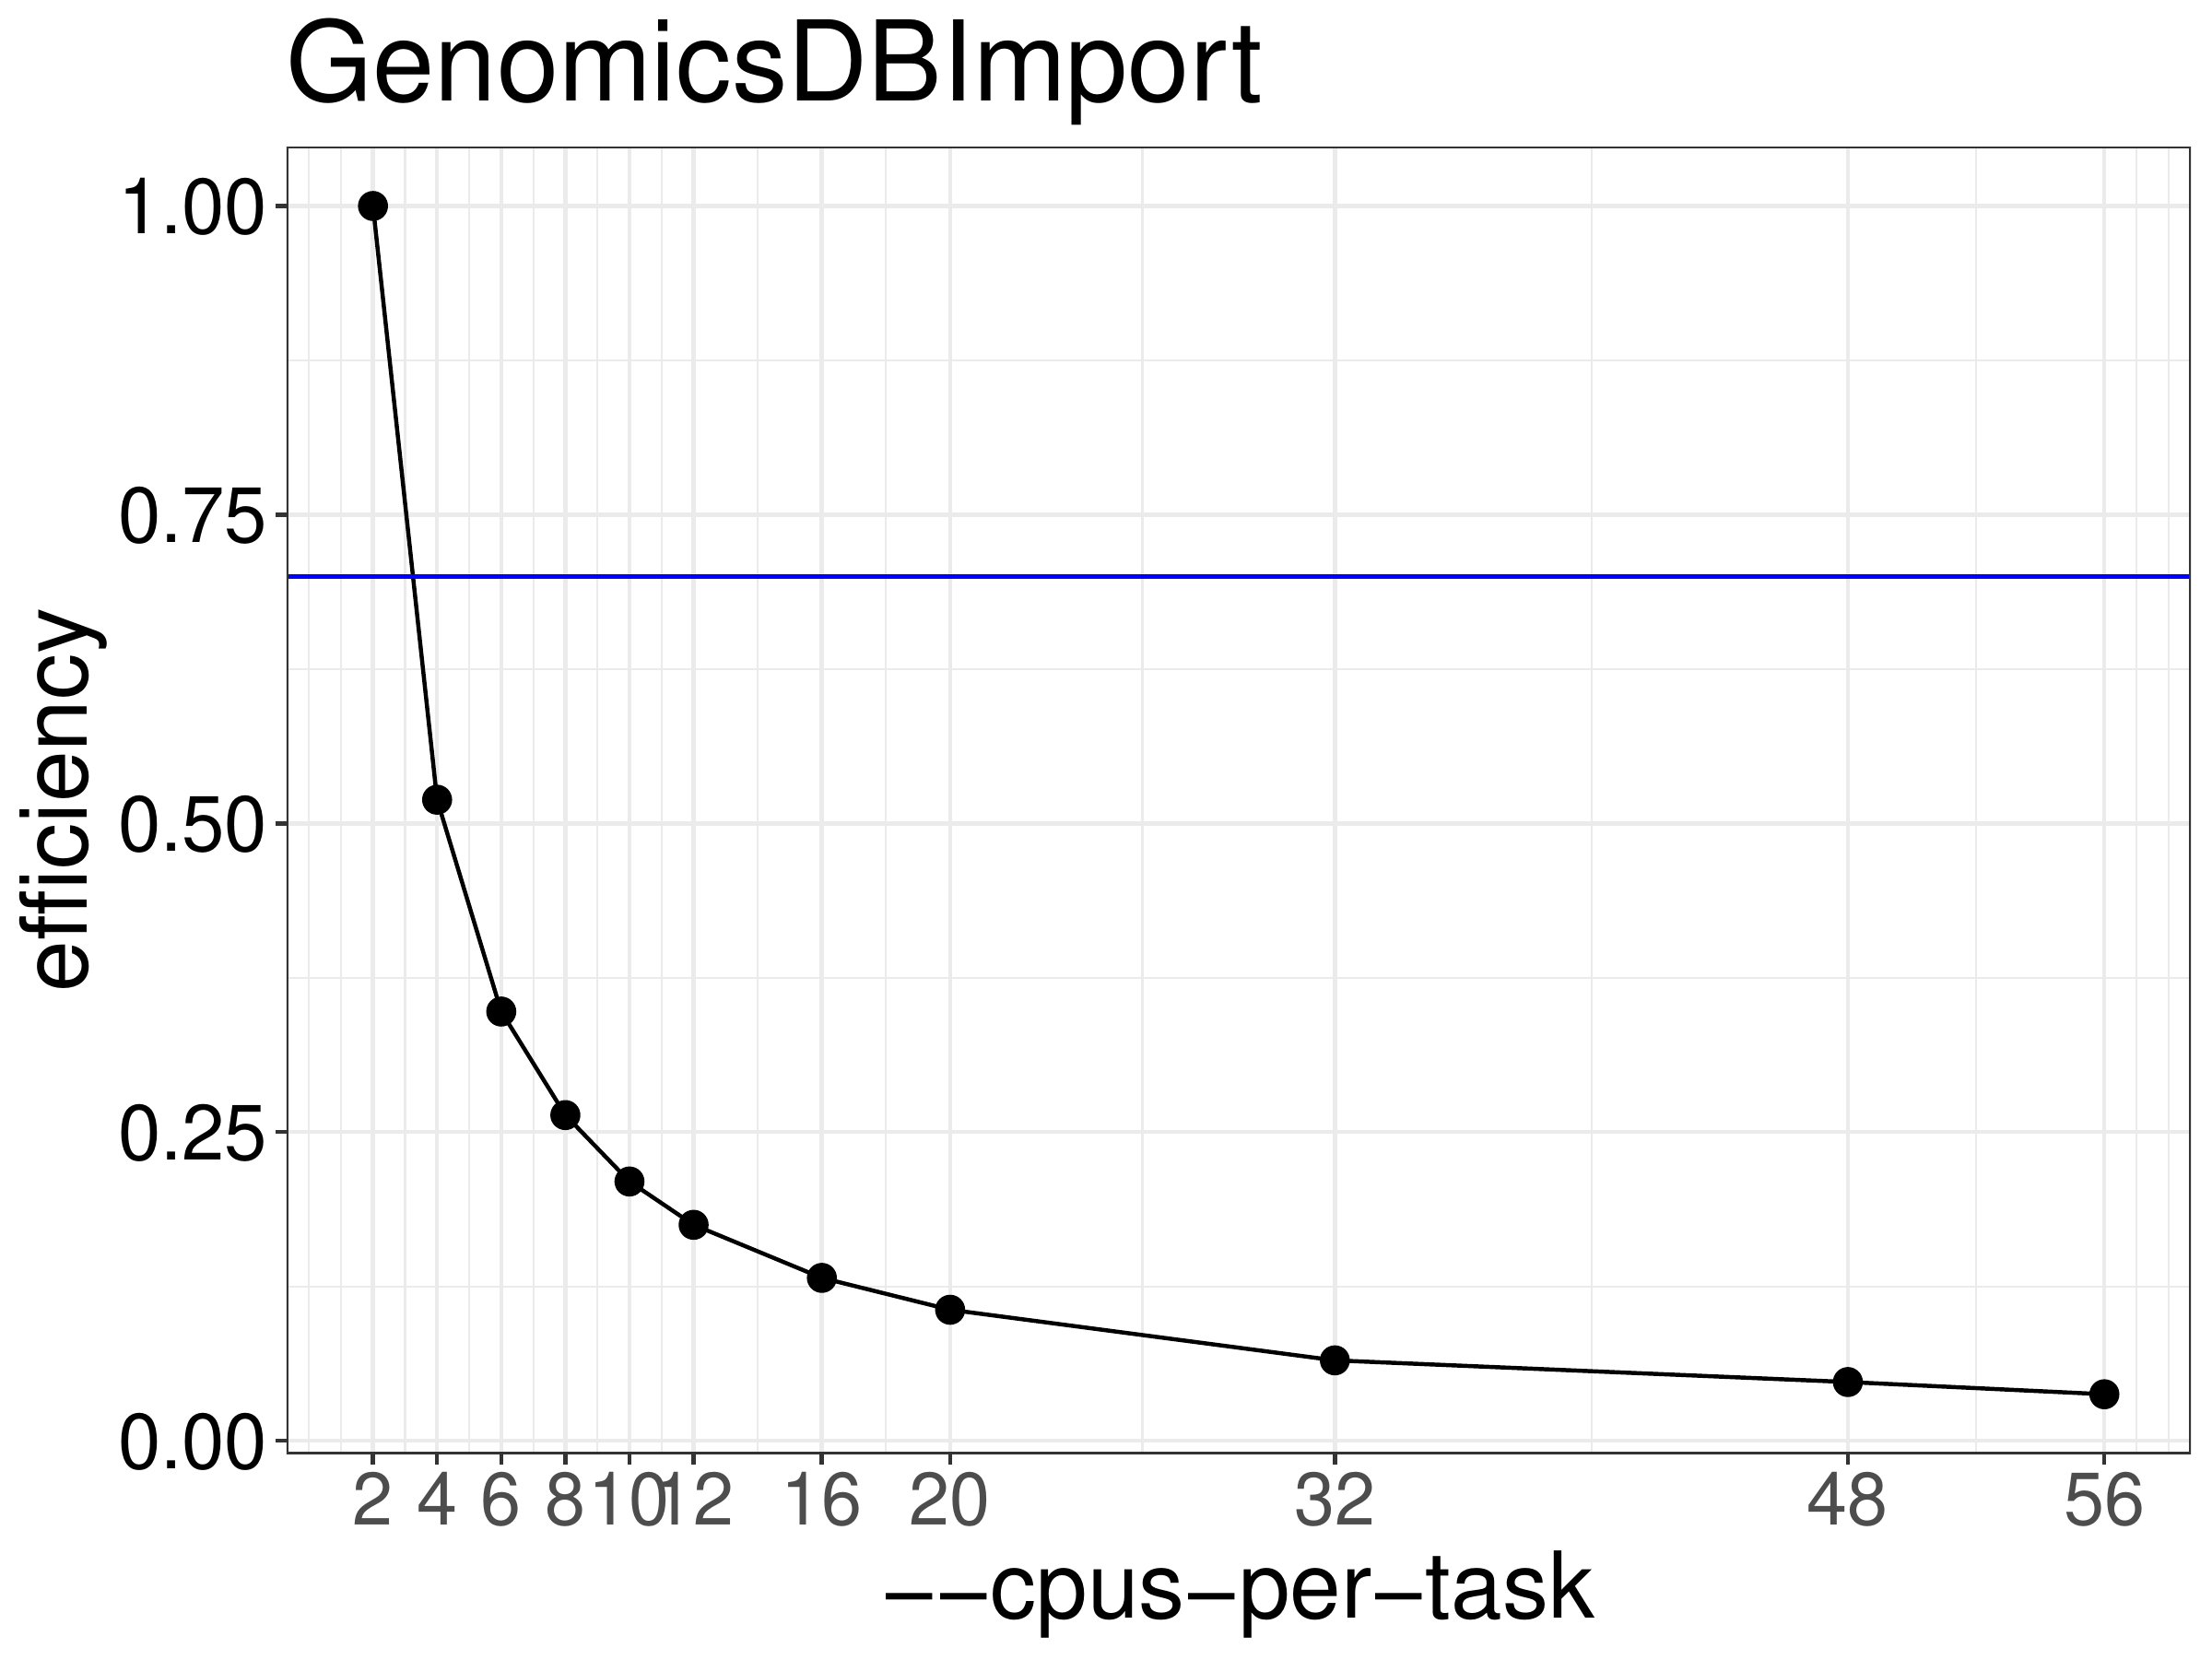 Efficiency of GenomicsDBImport as a function of the number of threads